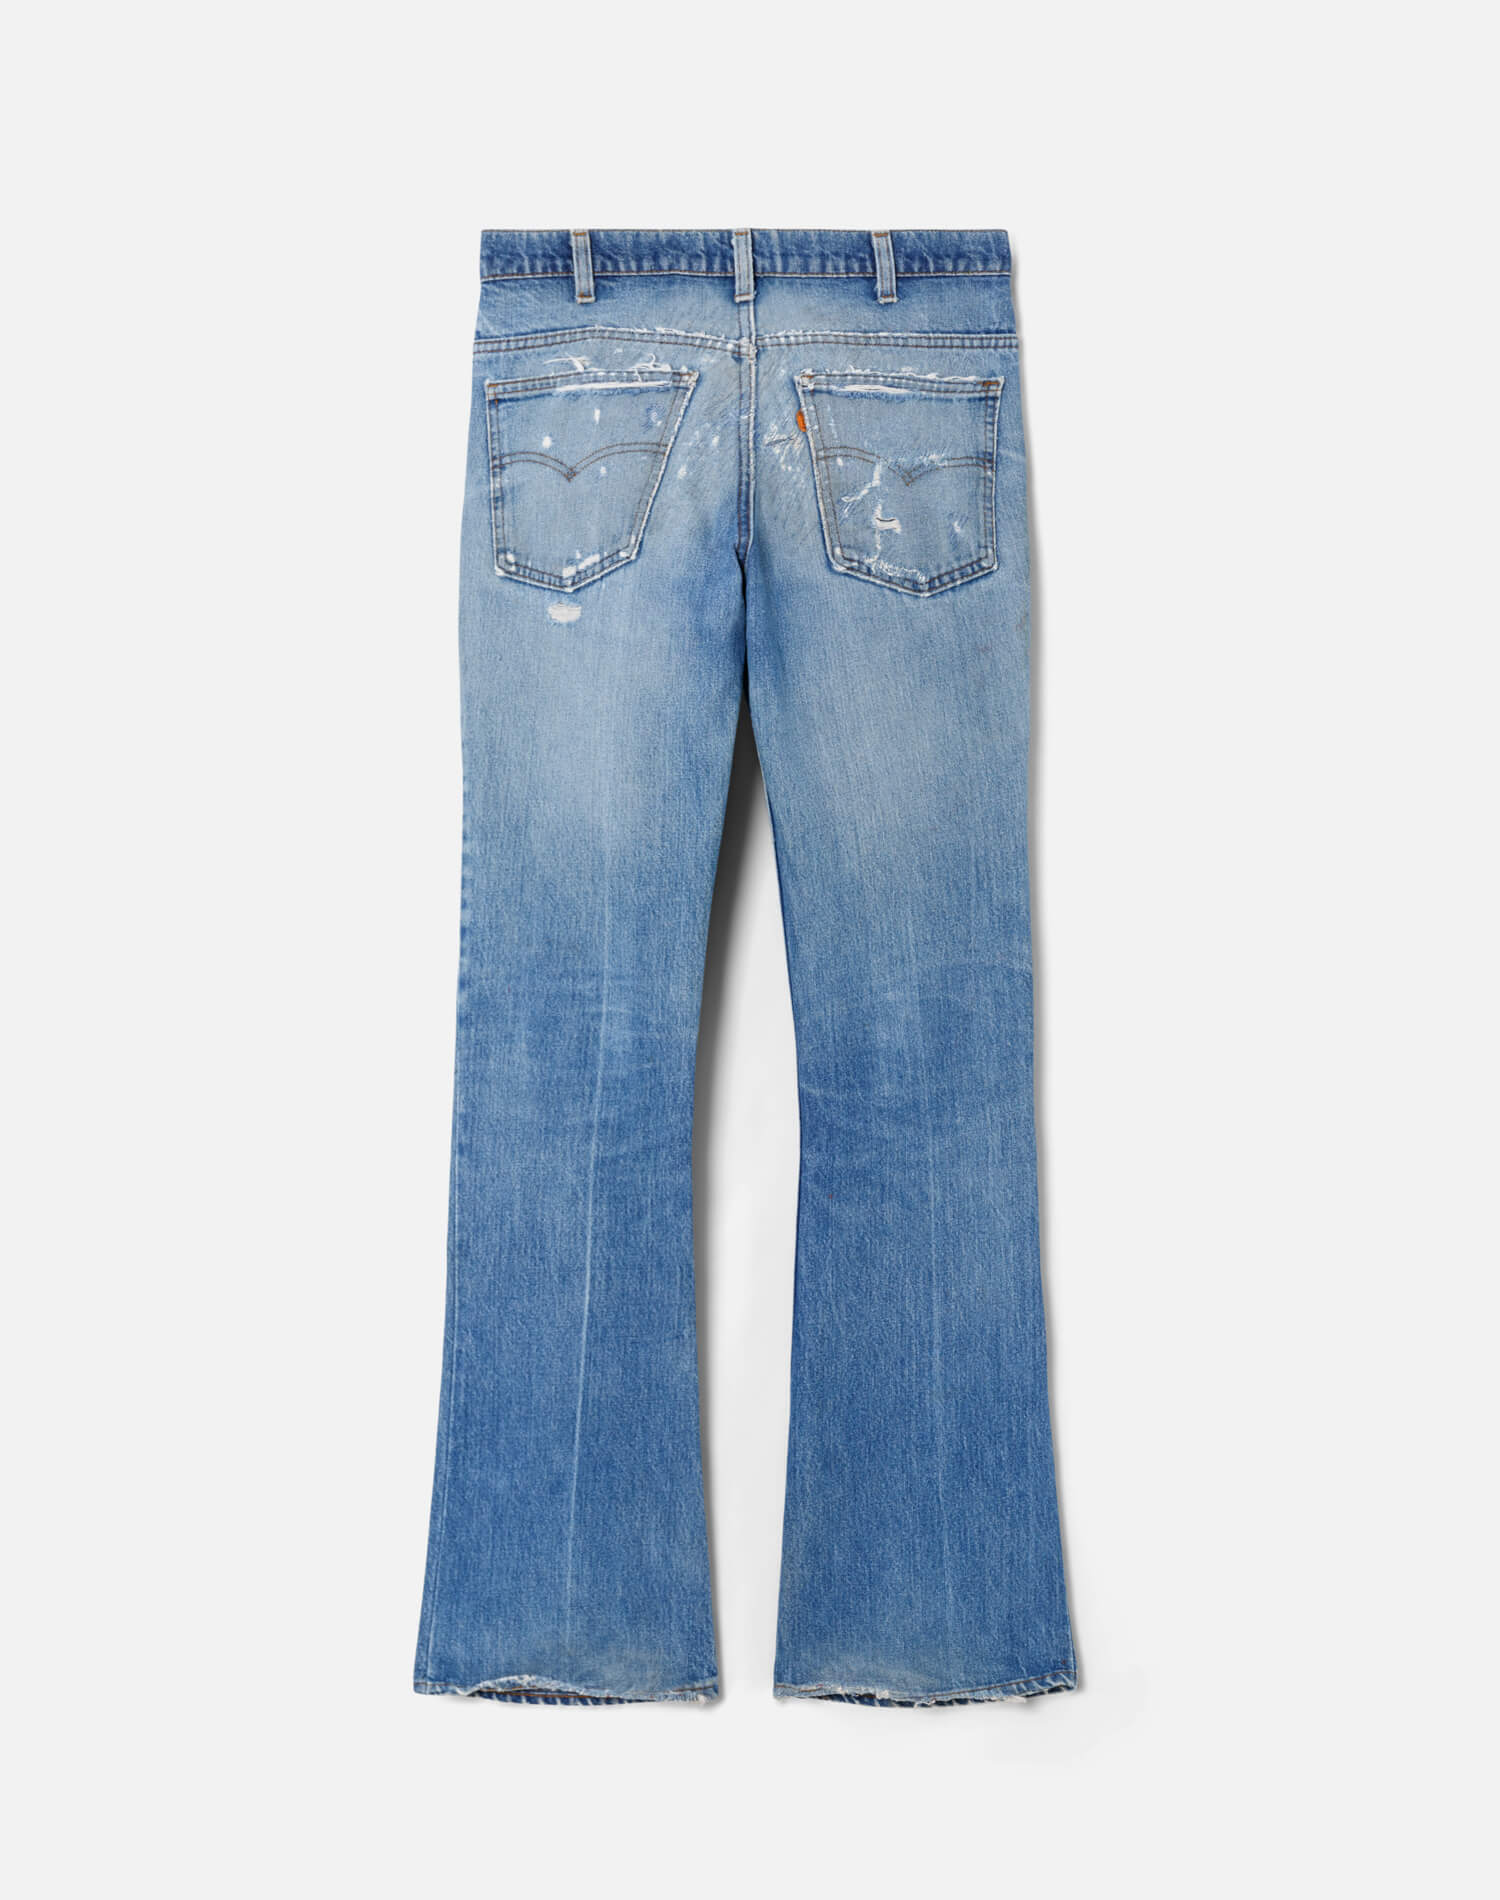 70s Repaired Distressed Levi's 517